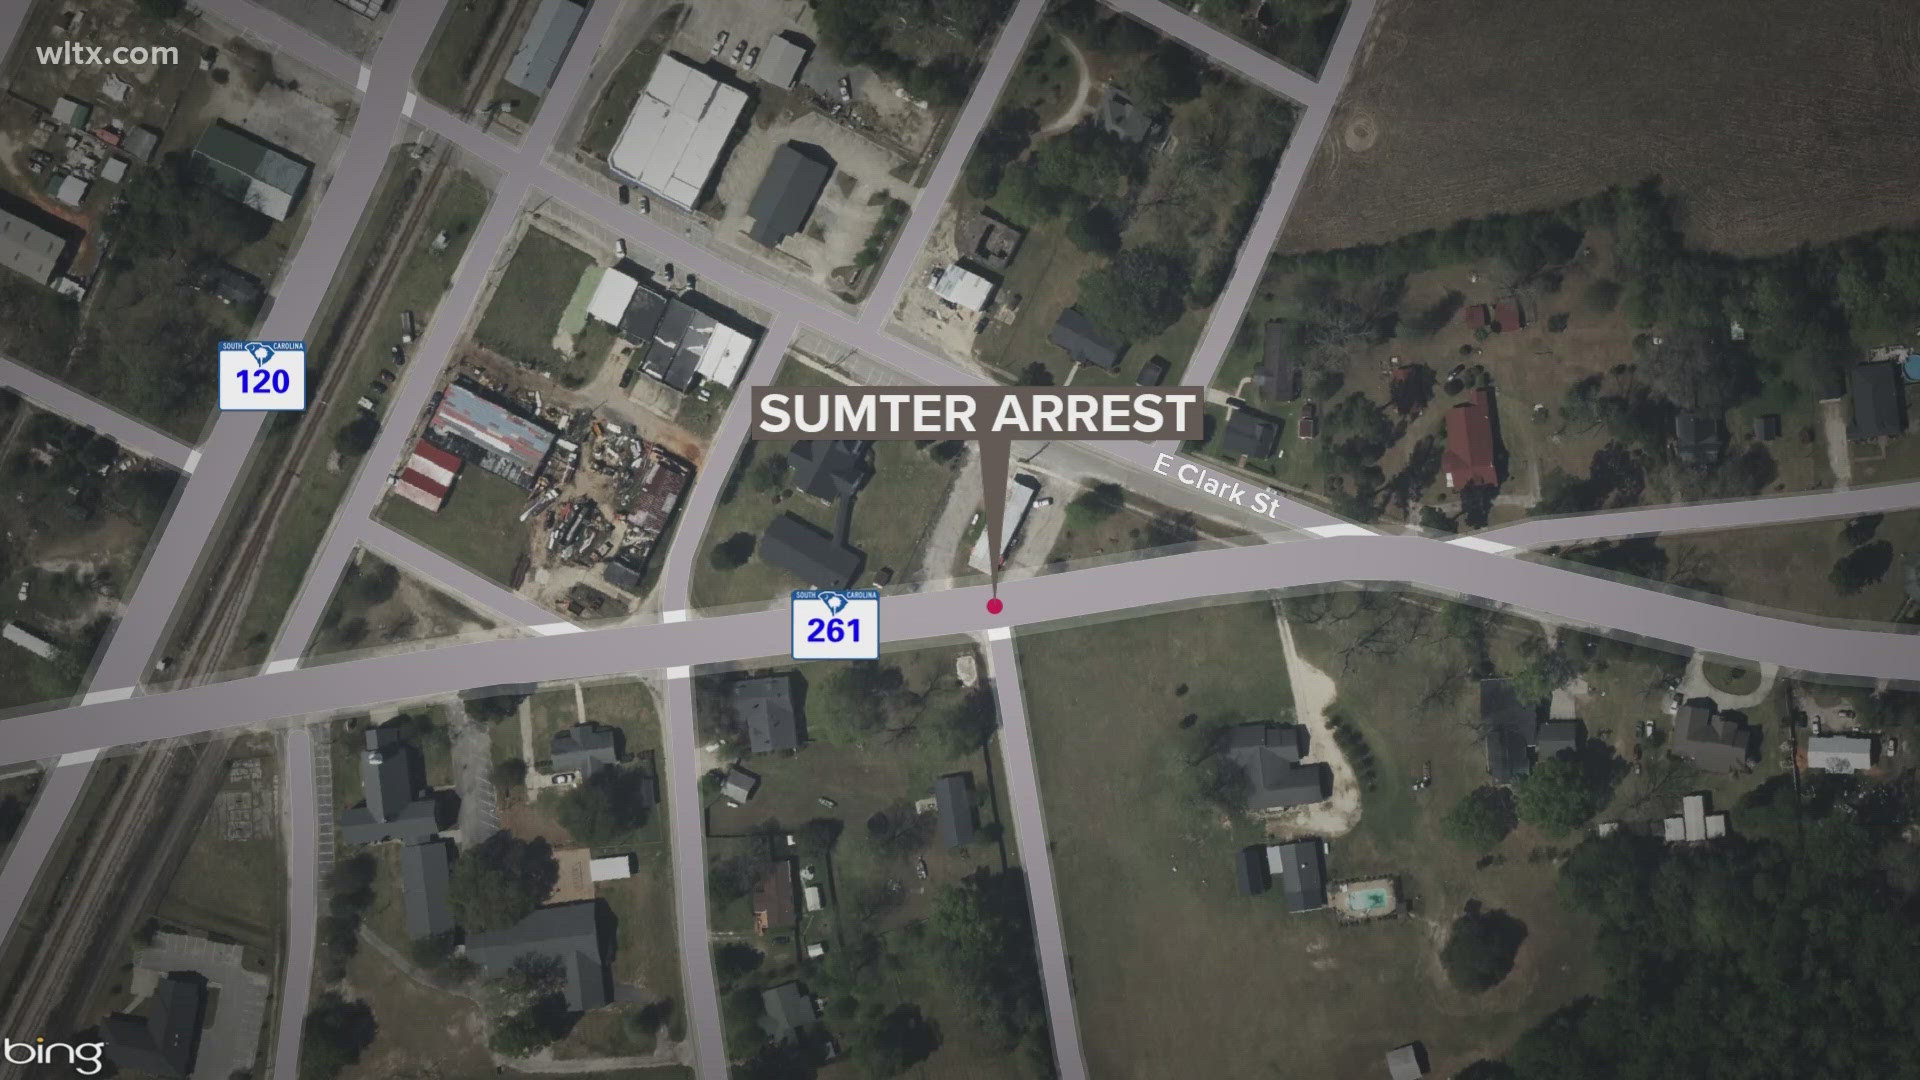 Sumter deputies are asking the public's help in locating a person suspected of burglaries in the area.